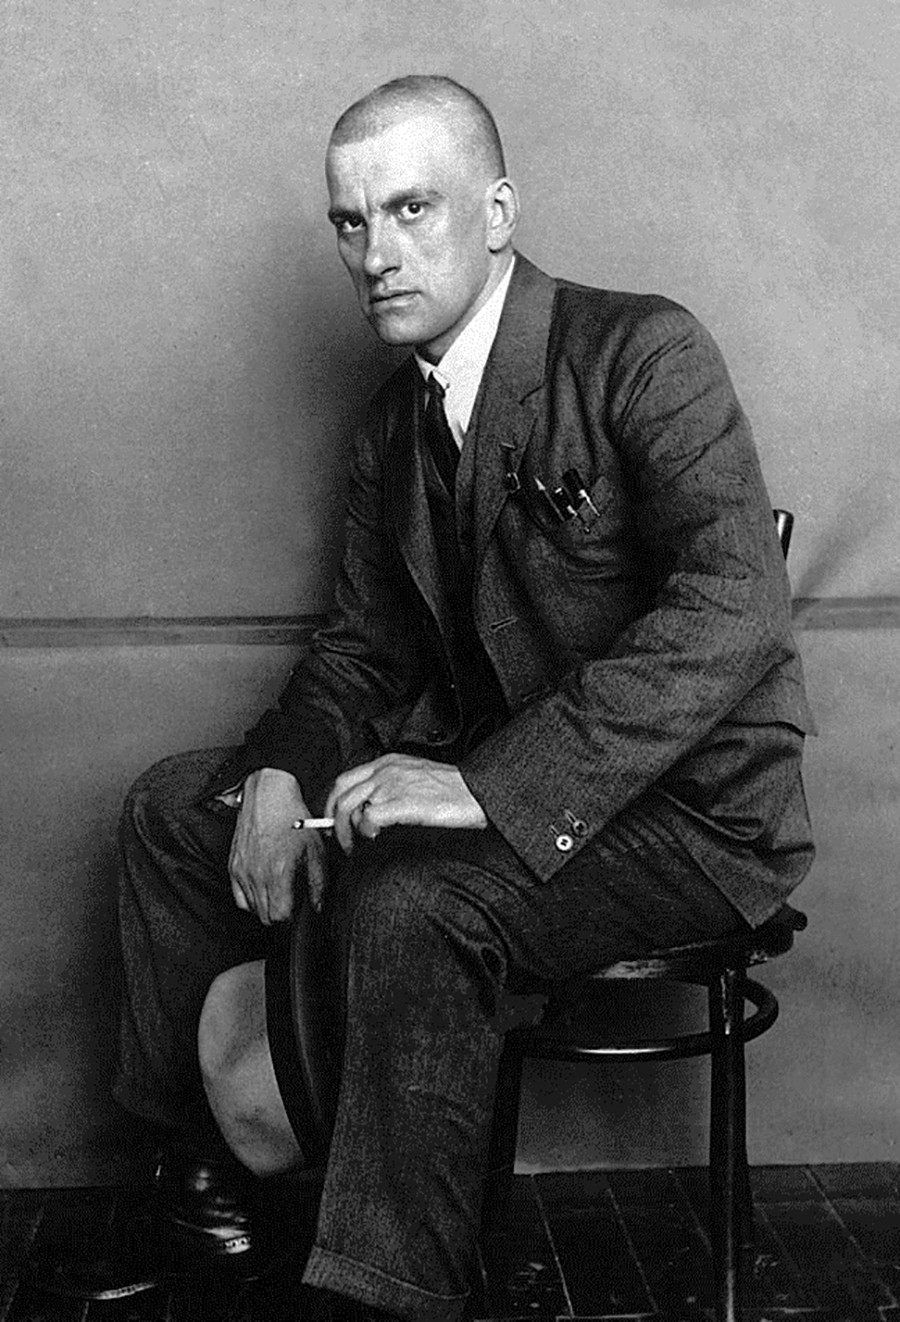 Provocative and even rude in his lyrics, Mayakovsky didn't really enjoy beating someone in real life - but sometimes he just had to.